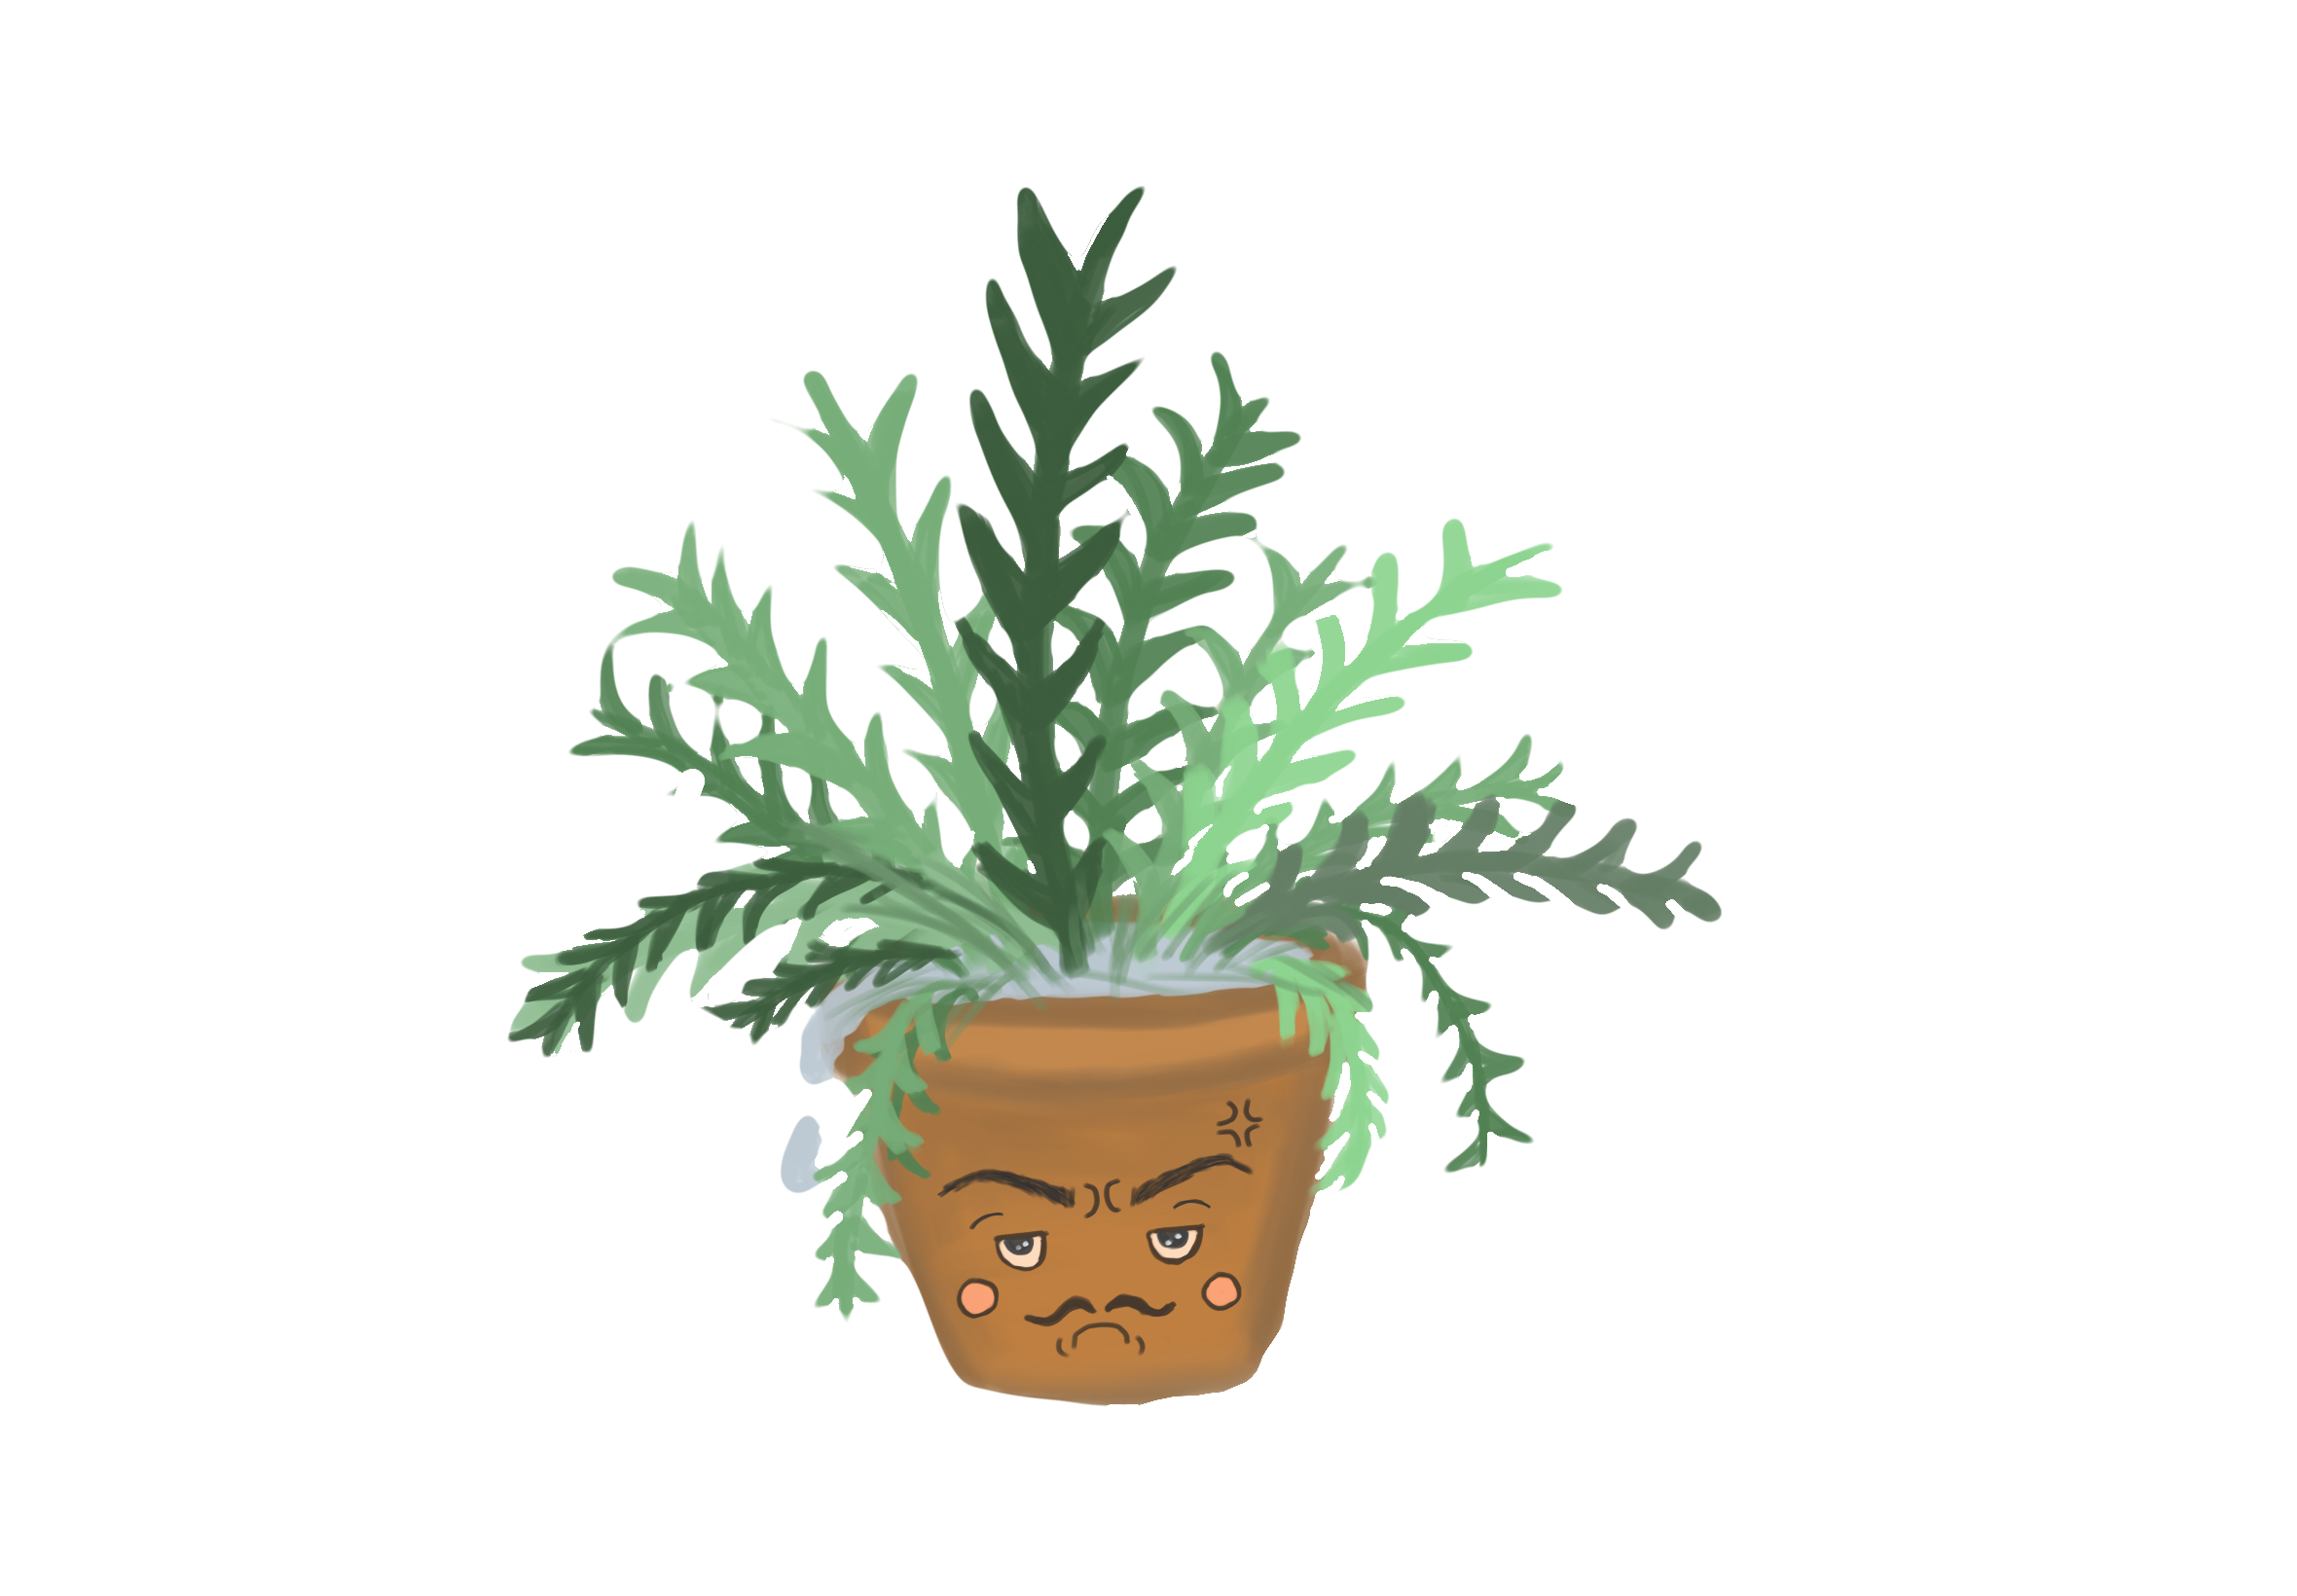 A fern in a pot. The pot has a grumpy face on it with a mustache indicating that the fern is unhappy.